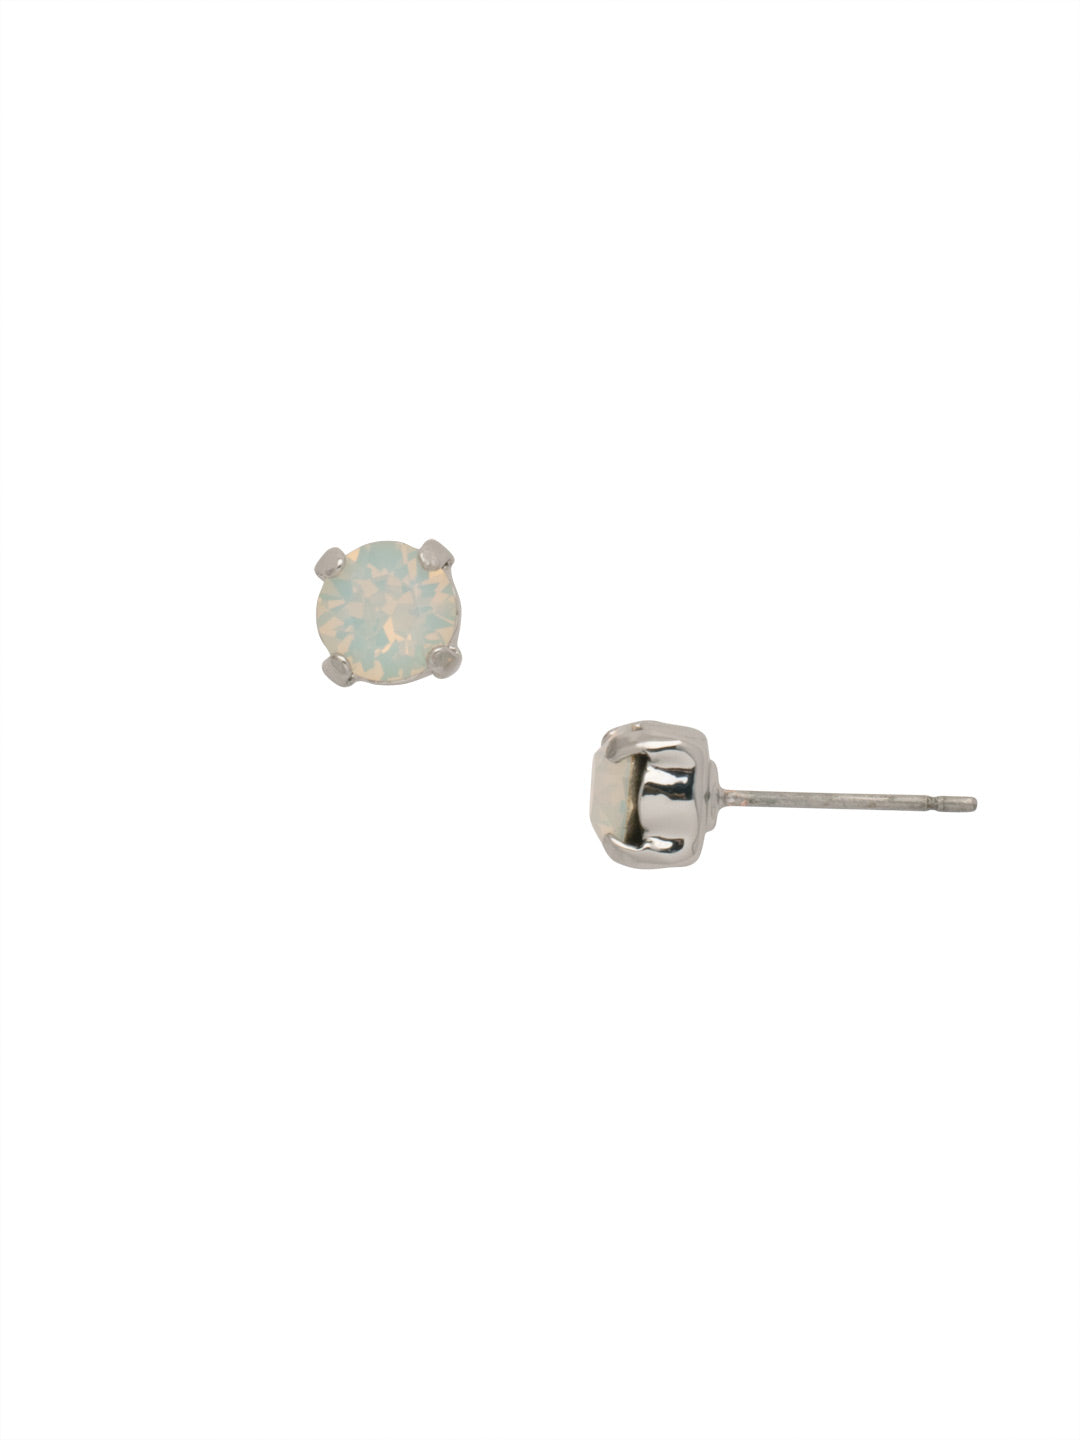 Jayda Stud Earrings - EDN32PDWO - <p>The Jayda Stud Earrings are the perfect every day wardrobe staple. A round crystal nestles perfectly in a metal plated post with four prongs. </p><p>Need help picking a stud? <a href="https://www.sorrelli.com/blogs/sisterhood/round-stud-earrings-101-a-rundown-of-sizes-styles-and-sparkle">Check out our size guide!</a> From Sorrelli's White Opal collection in our Palladium finish.</p>